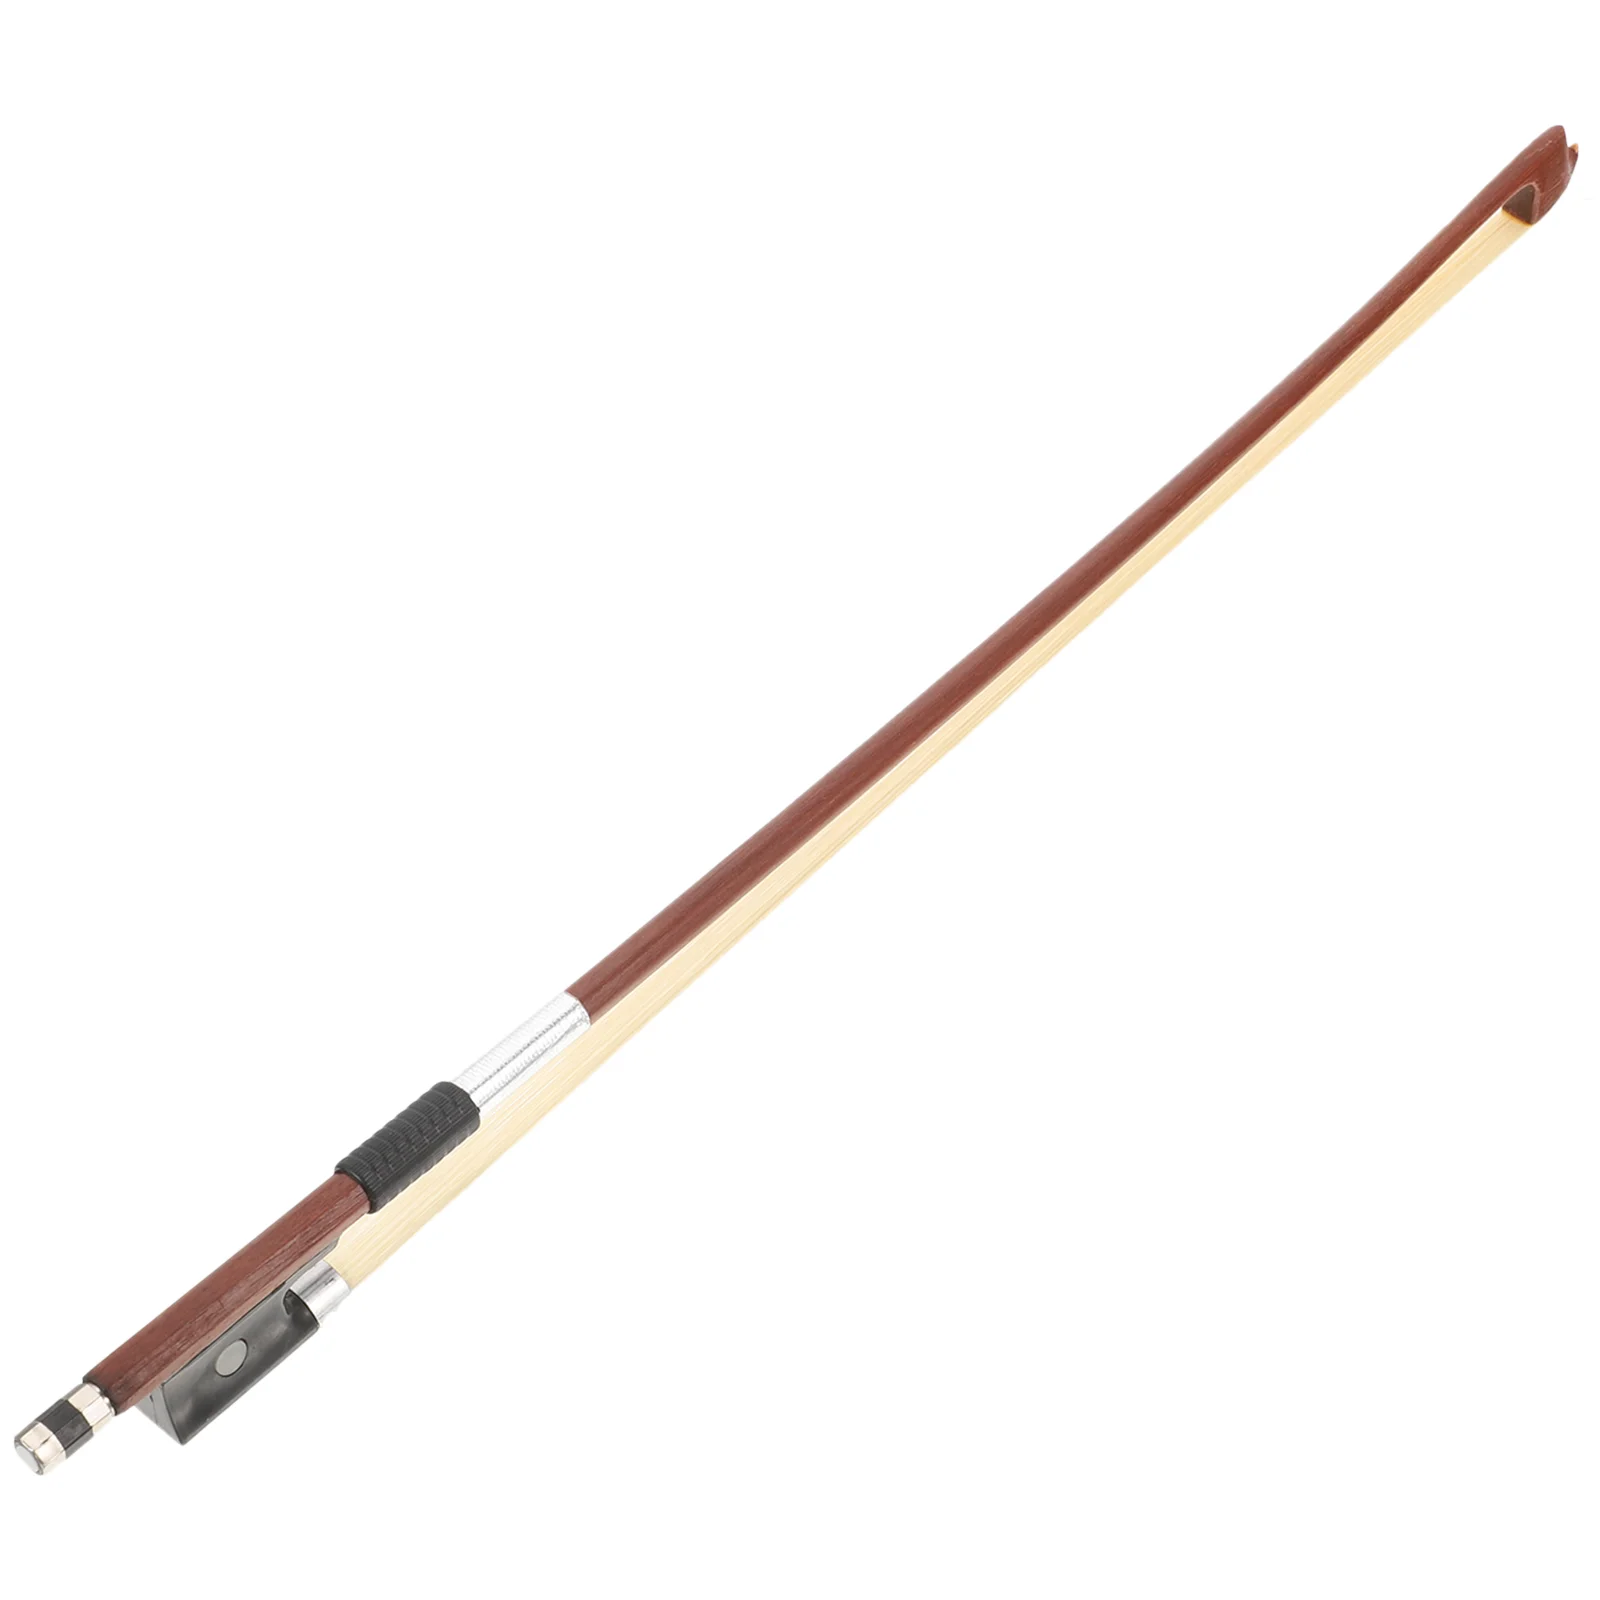 

Violin Bow Guitar Parts Students Component Wooden Instrument Accessory Useful Horsetail Hair Made Musical 1/4 Well Accessories